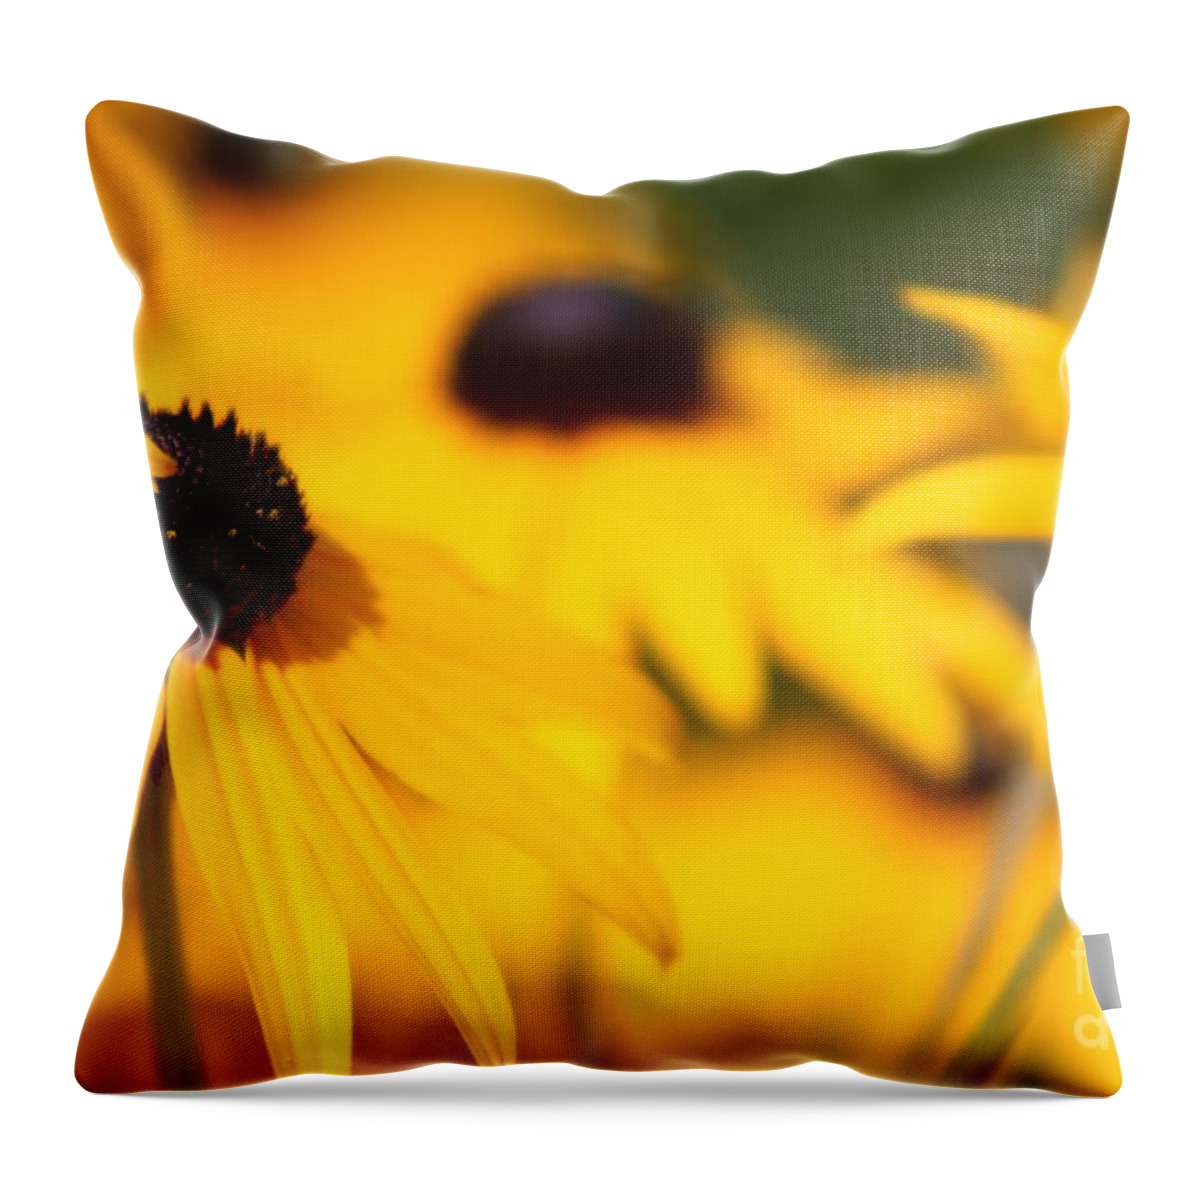 Yellow Throw Pillow featuring the photograph Nature's Beauty 50 by Deena Withycombe